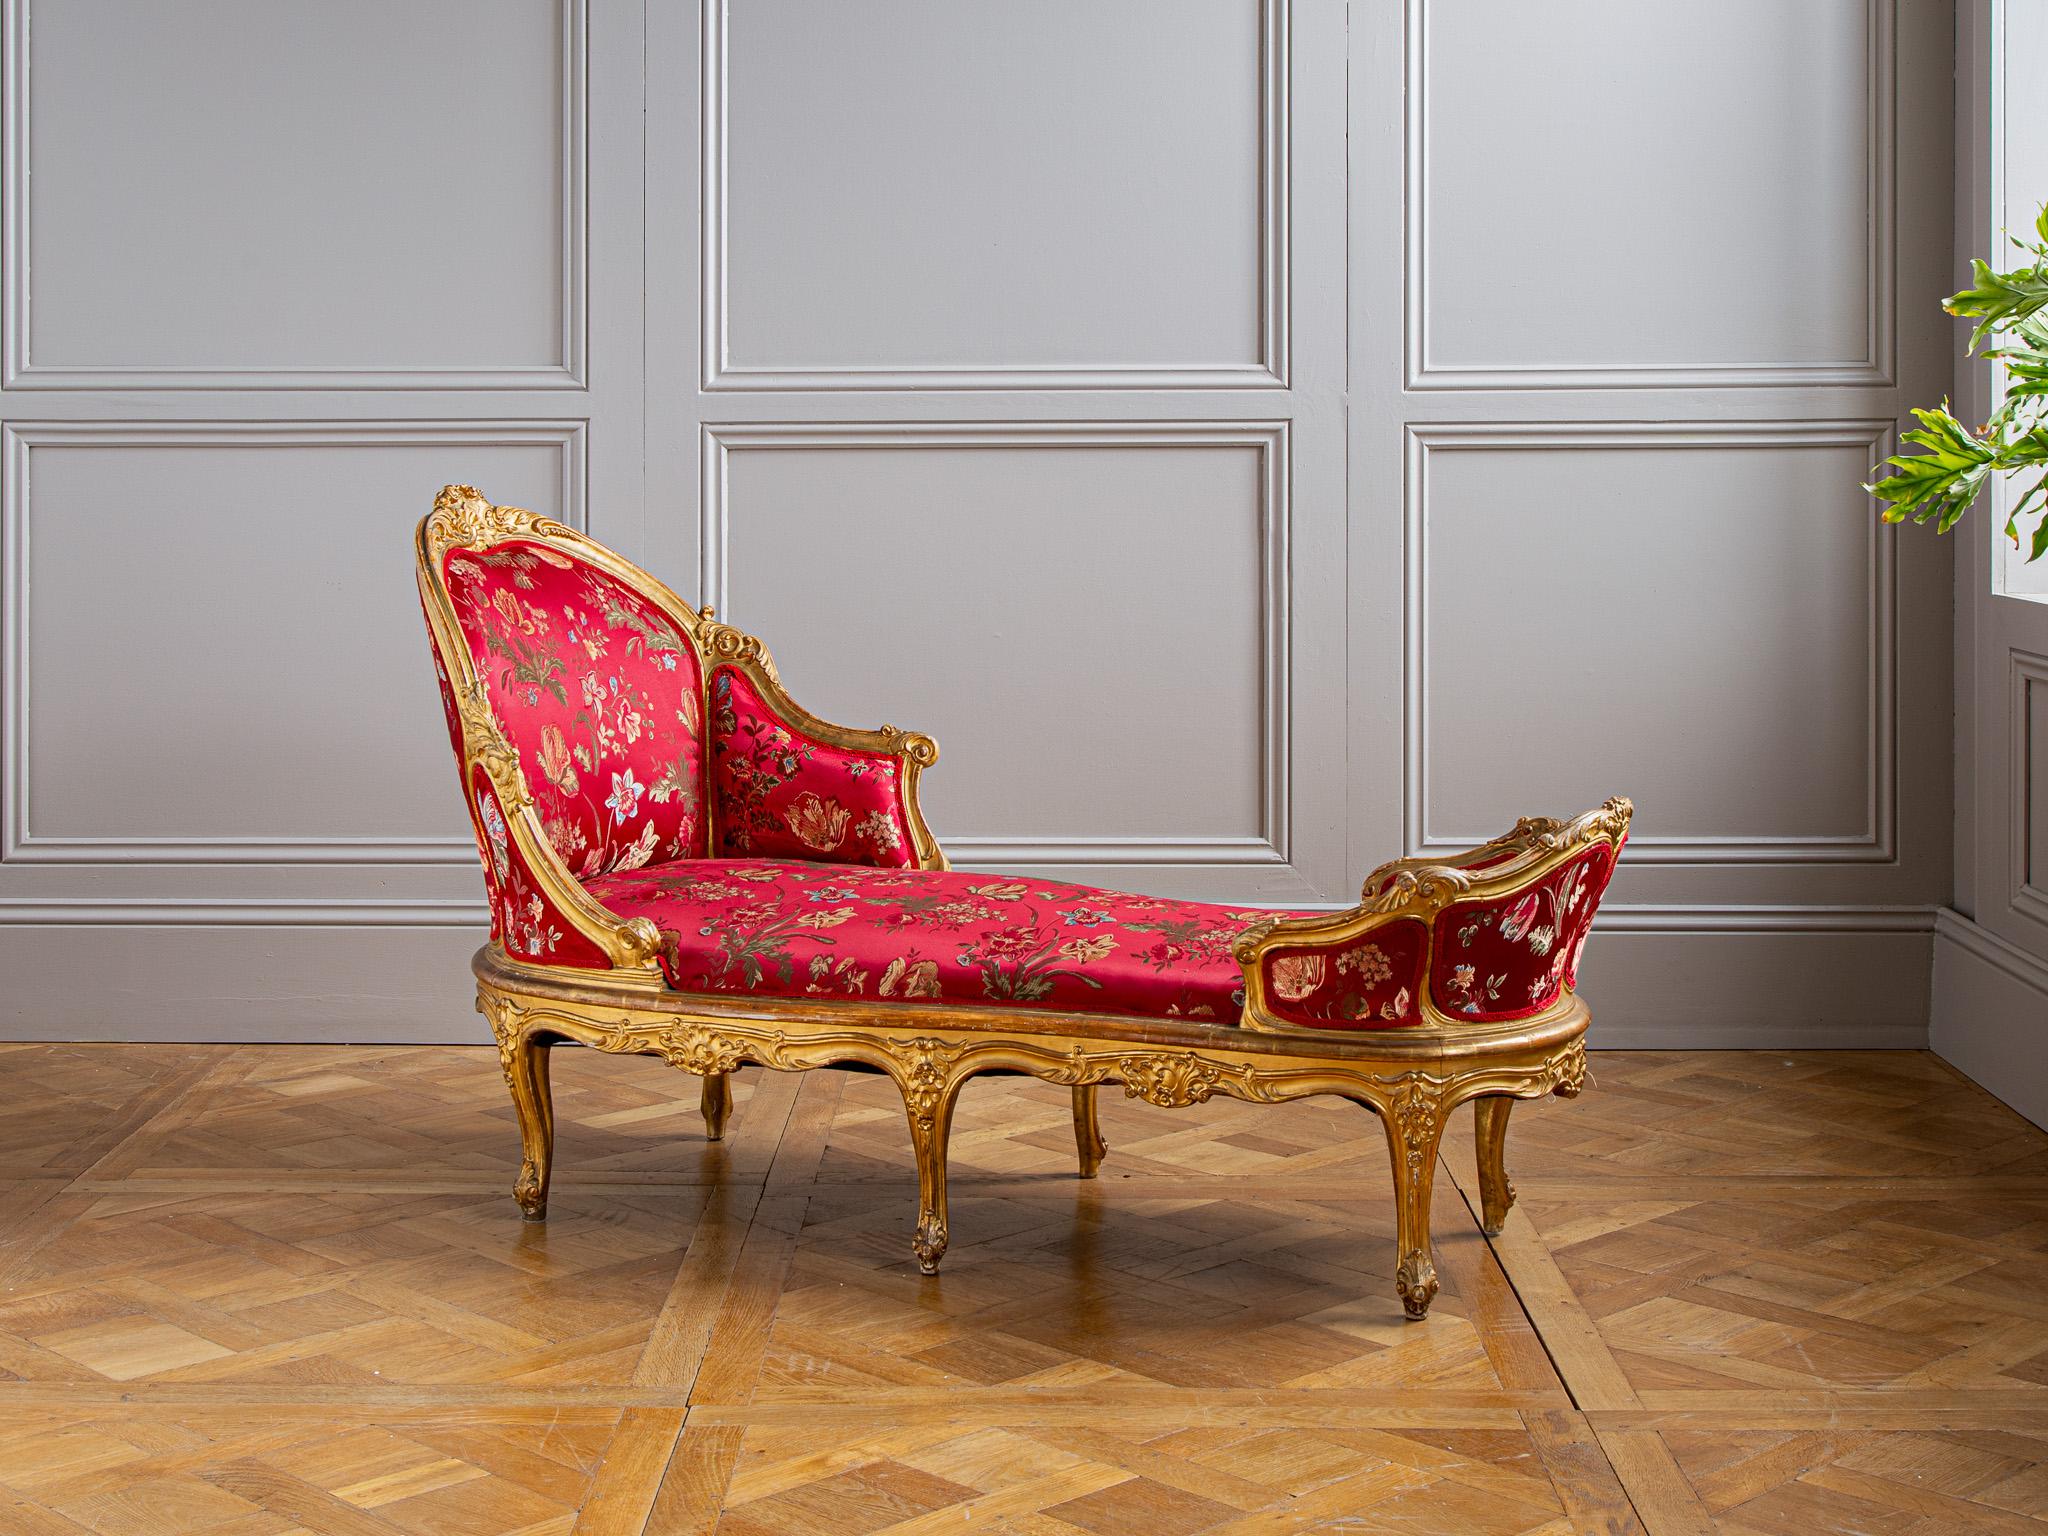 Circa 1880 Italian Giltwood LXV Style Chaise Longue For Sale 2